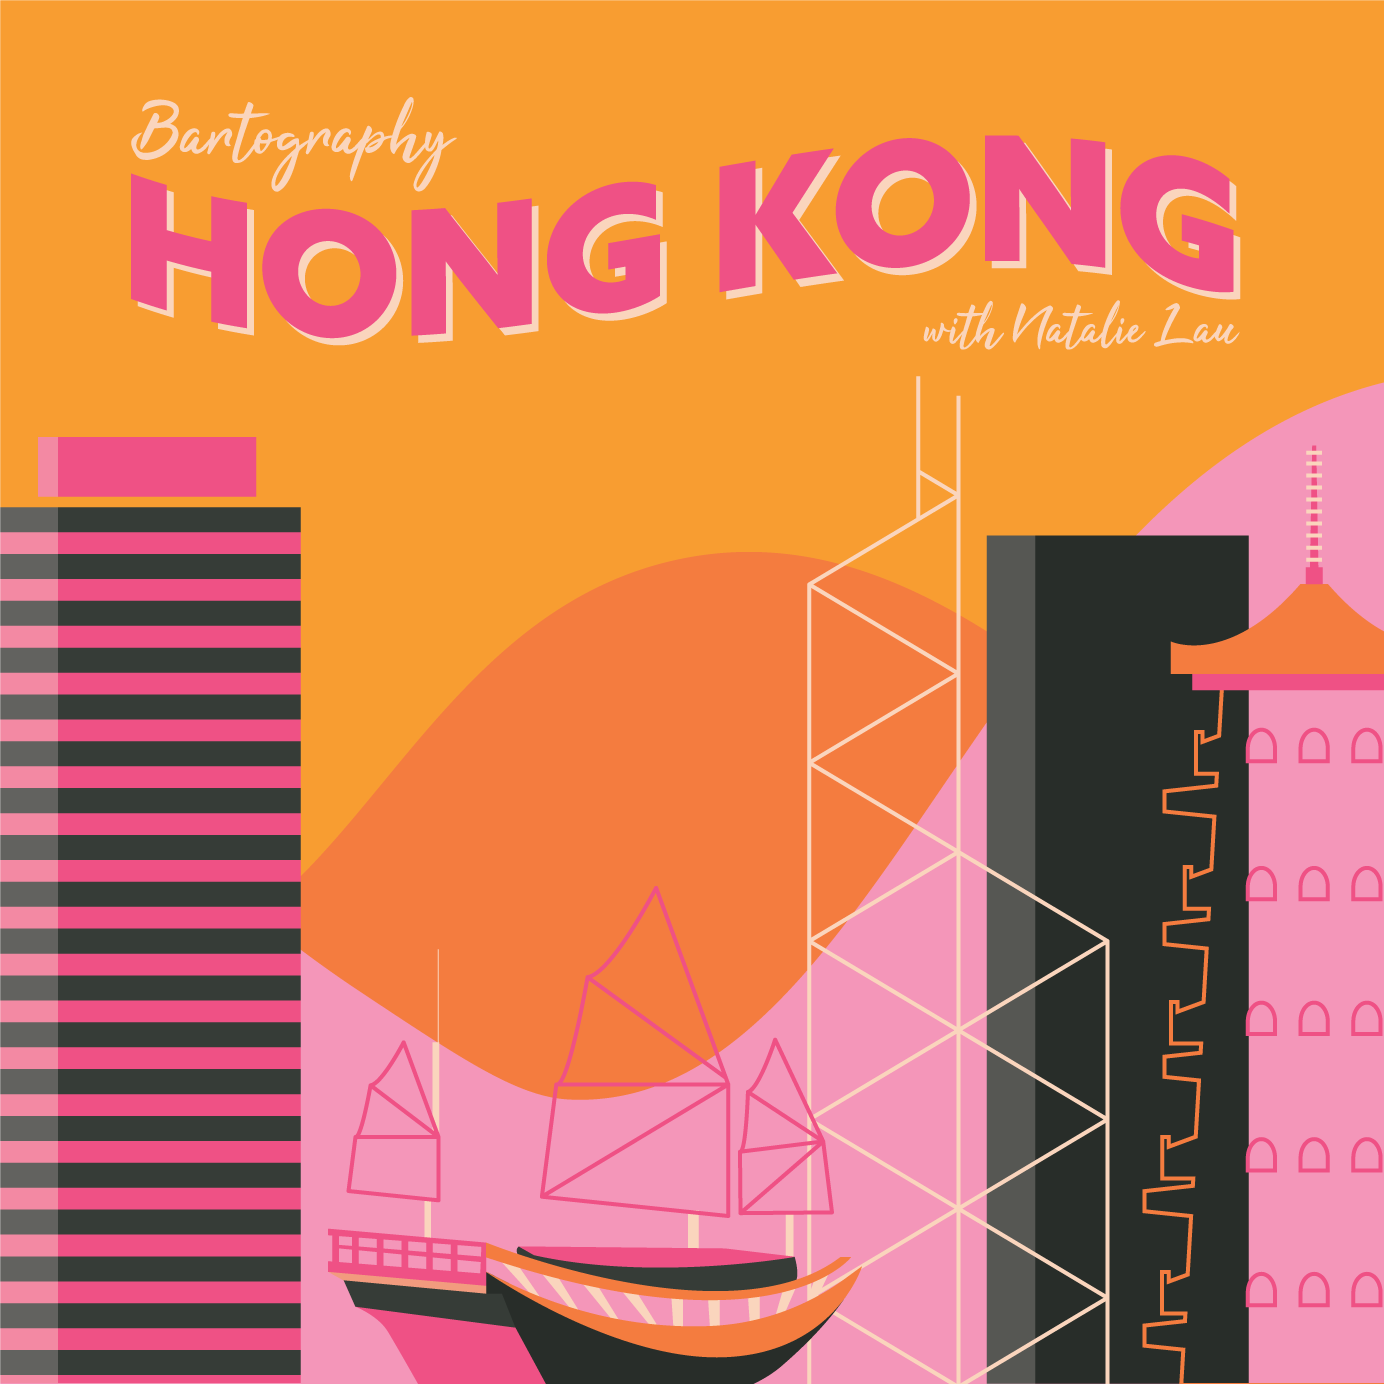 Everything That’s Worth Drinking in Hong Kong, According to The Old Man’s Natalie Lau